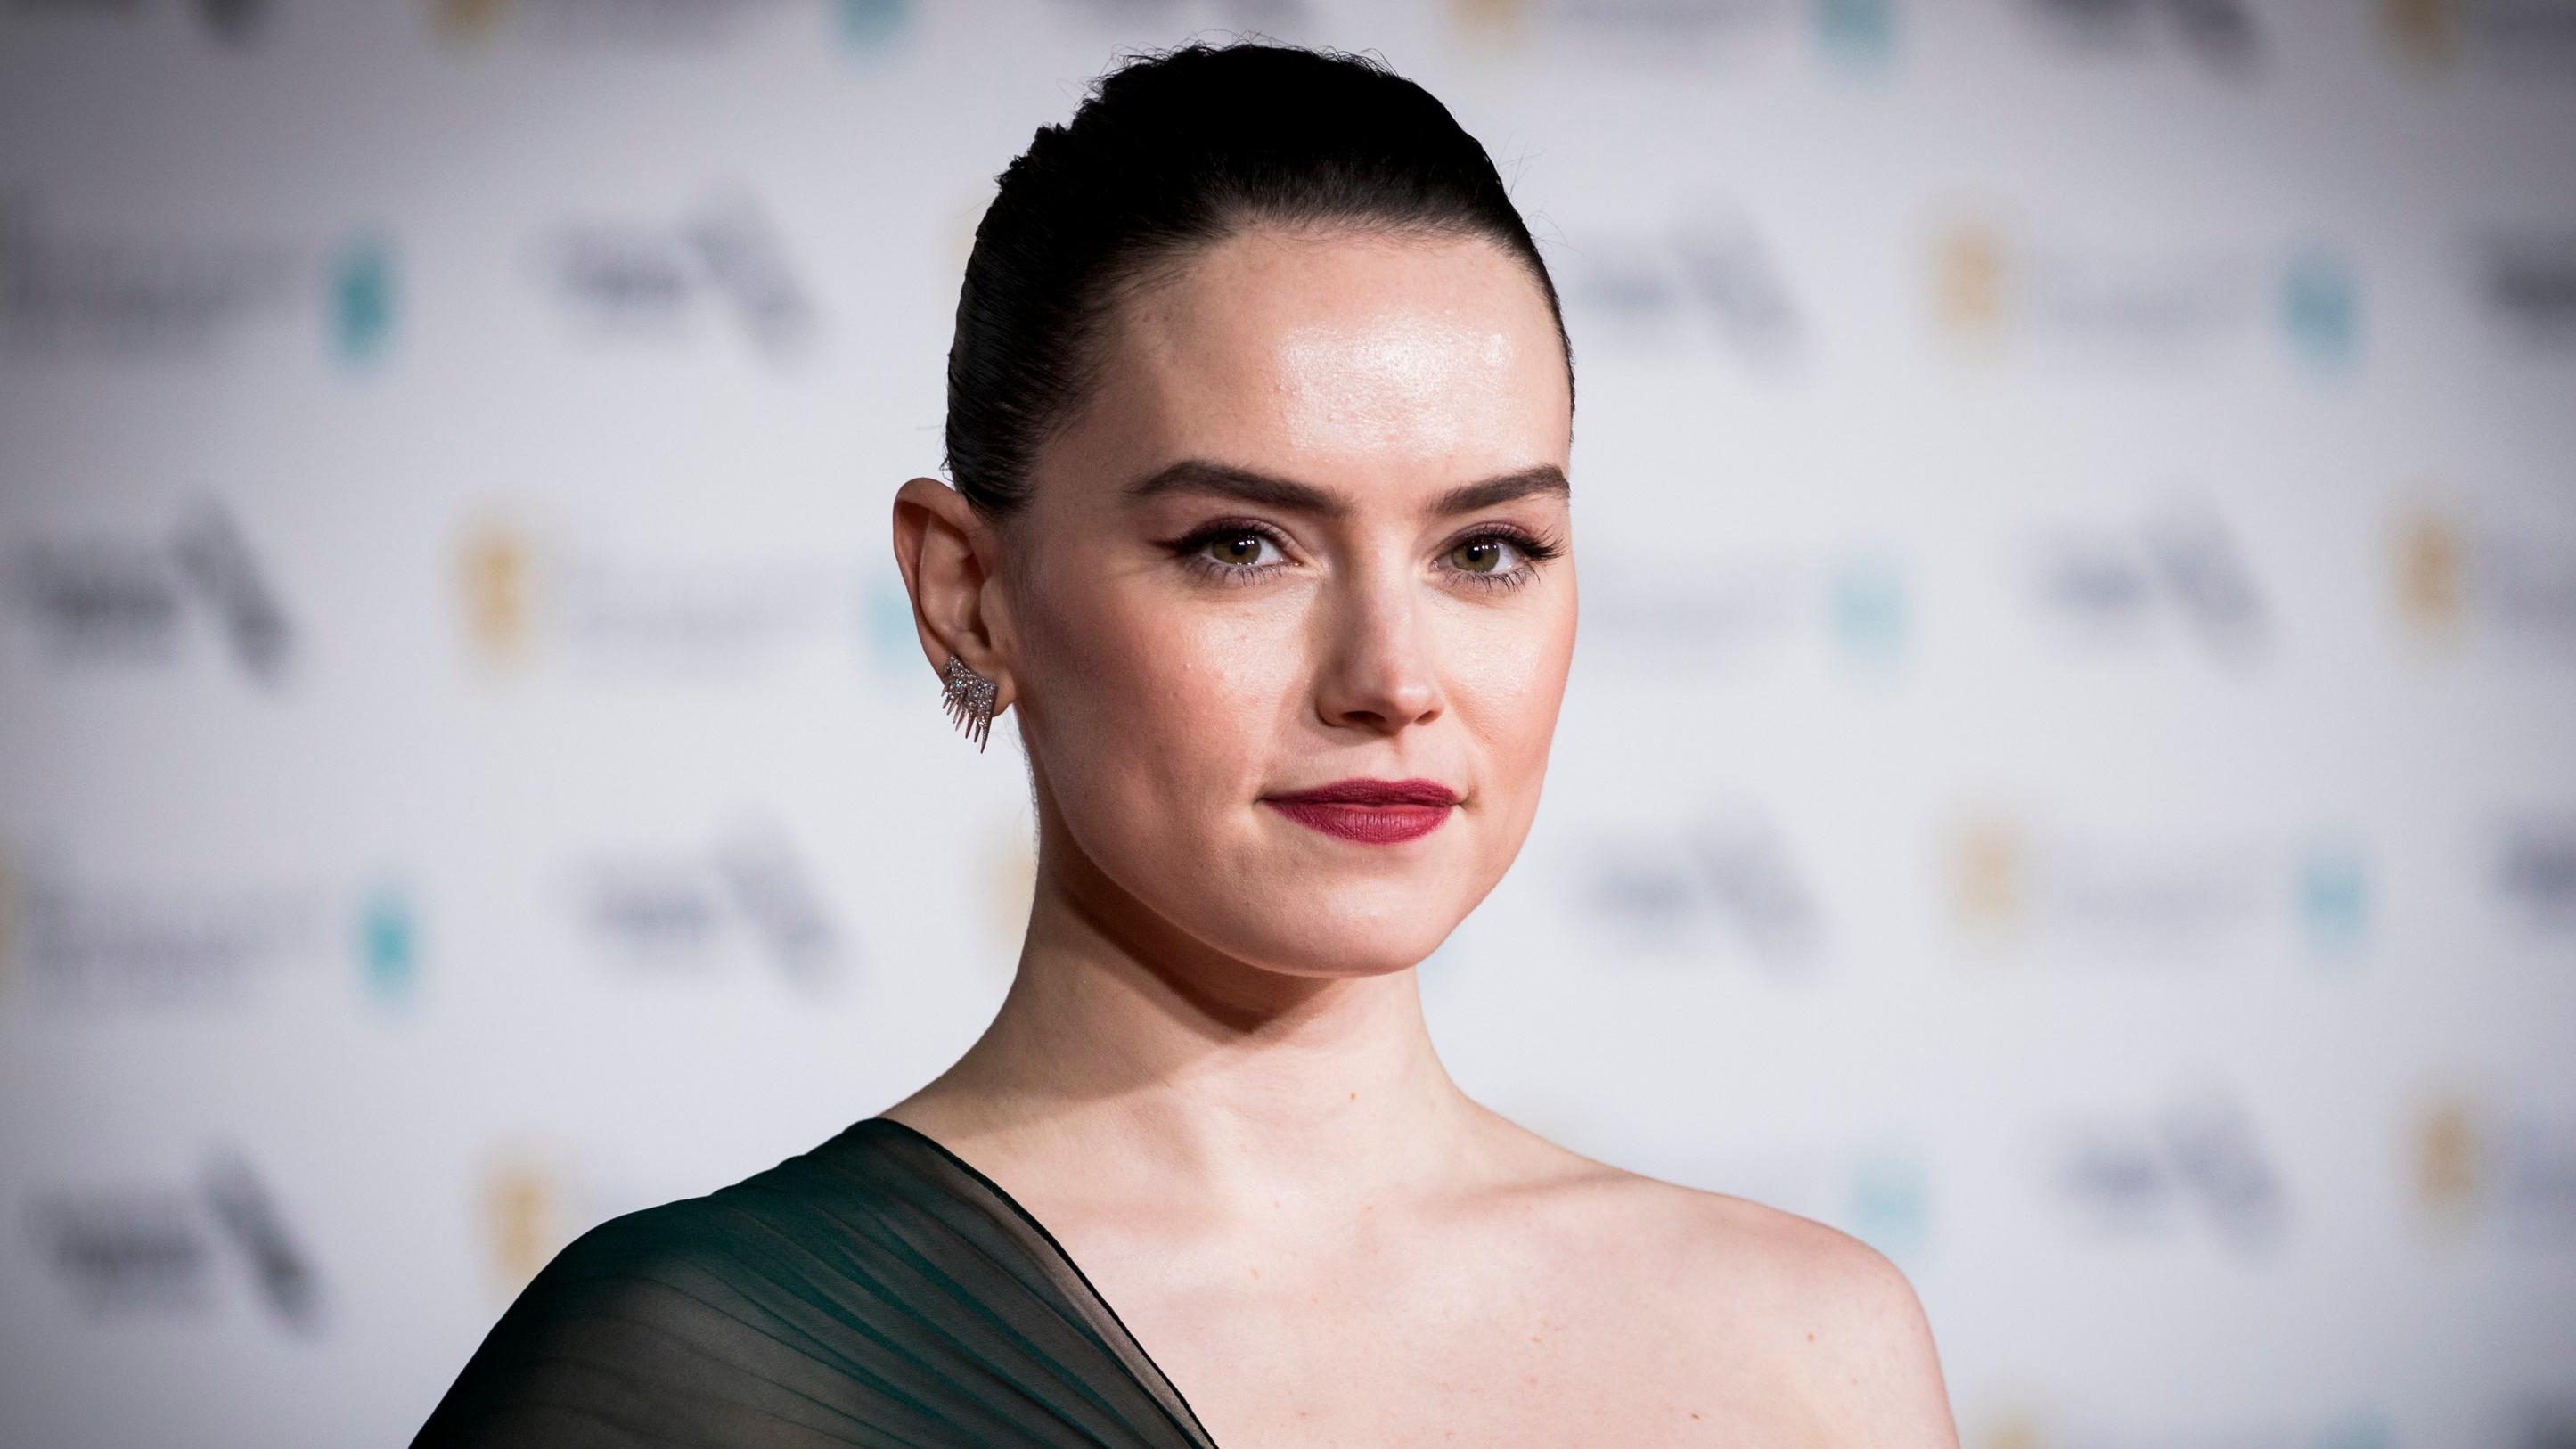 Daisy Ridley to star in and produce indie film Sometimes I Think About Dying